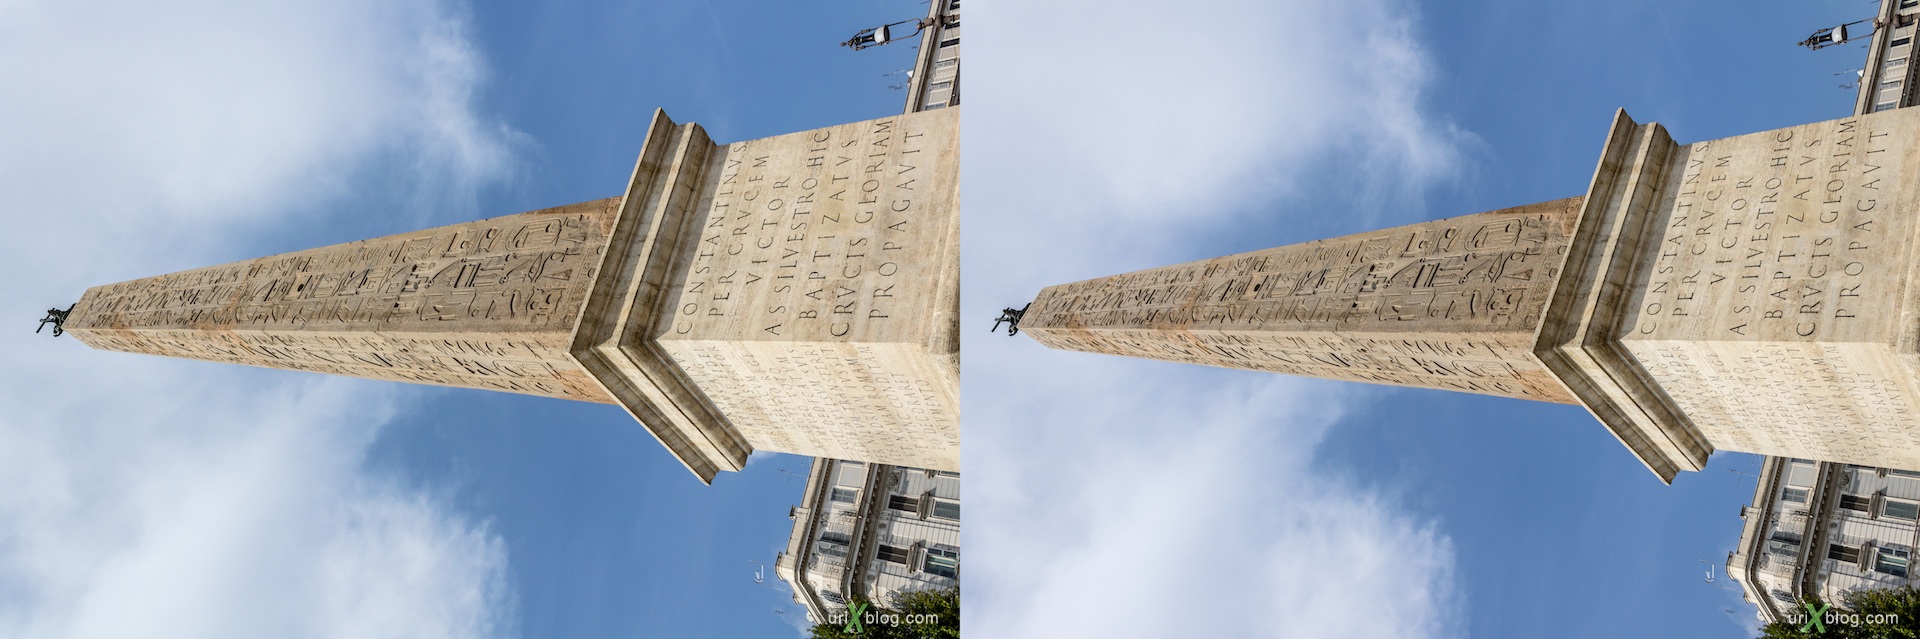 2012, Lateran Obelisk, Ancient Egypt, Piazza di San Giovanni in Laterano square, 3D, stereo pair, cross-eyed, crossview, cross view stereo pair